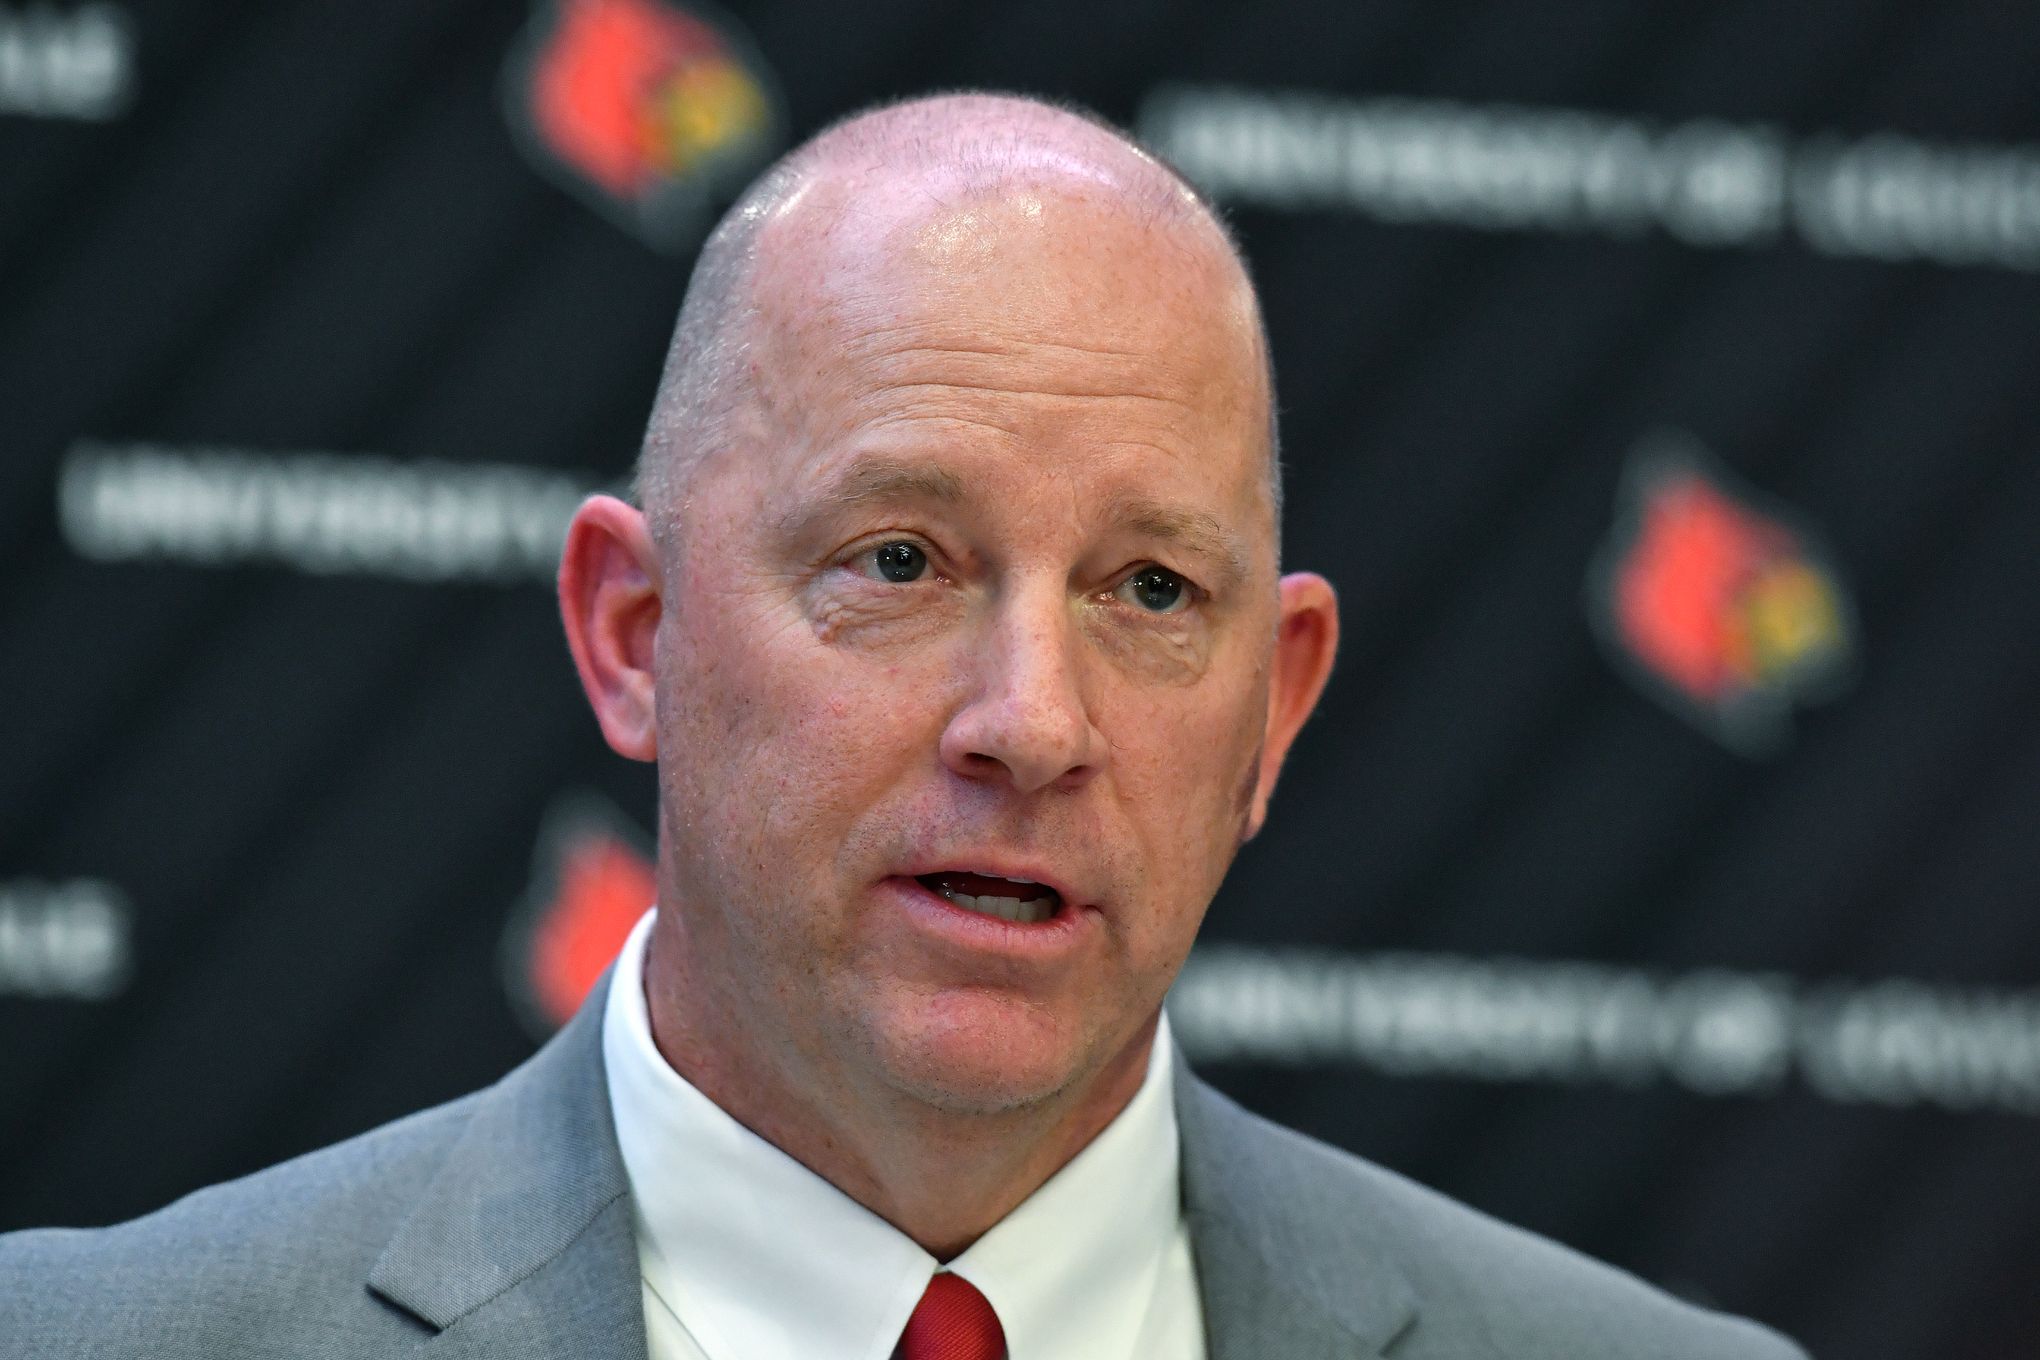 Jeff Brohm is back home coaching Louisville with much expected of the  Cardinals in first year